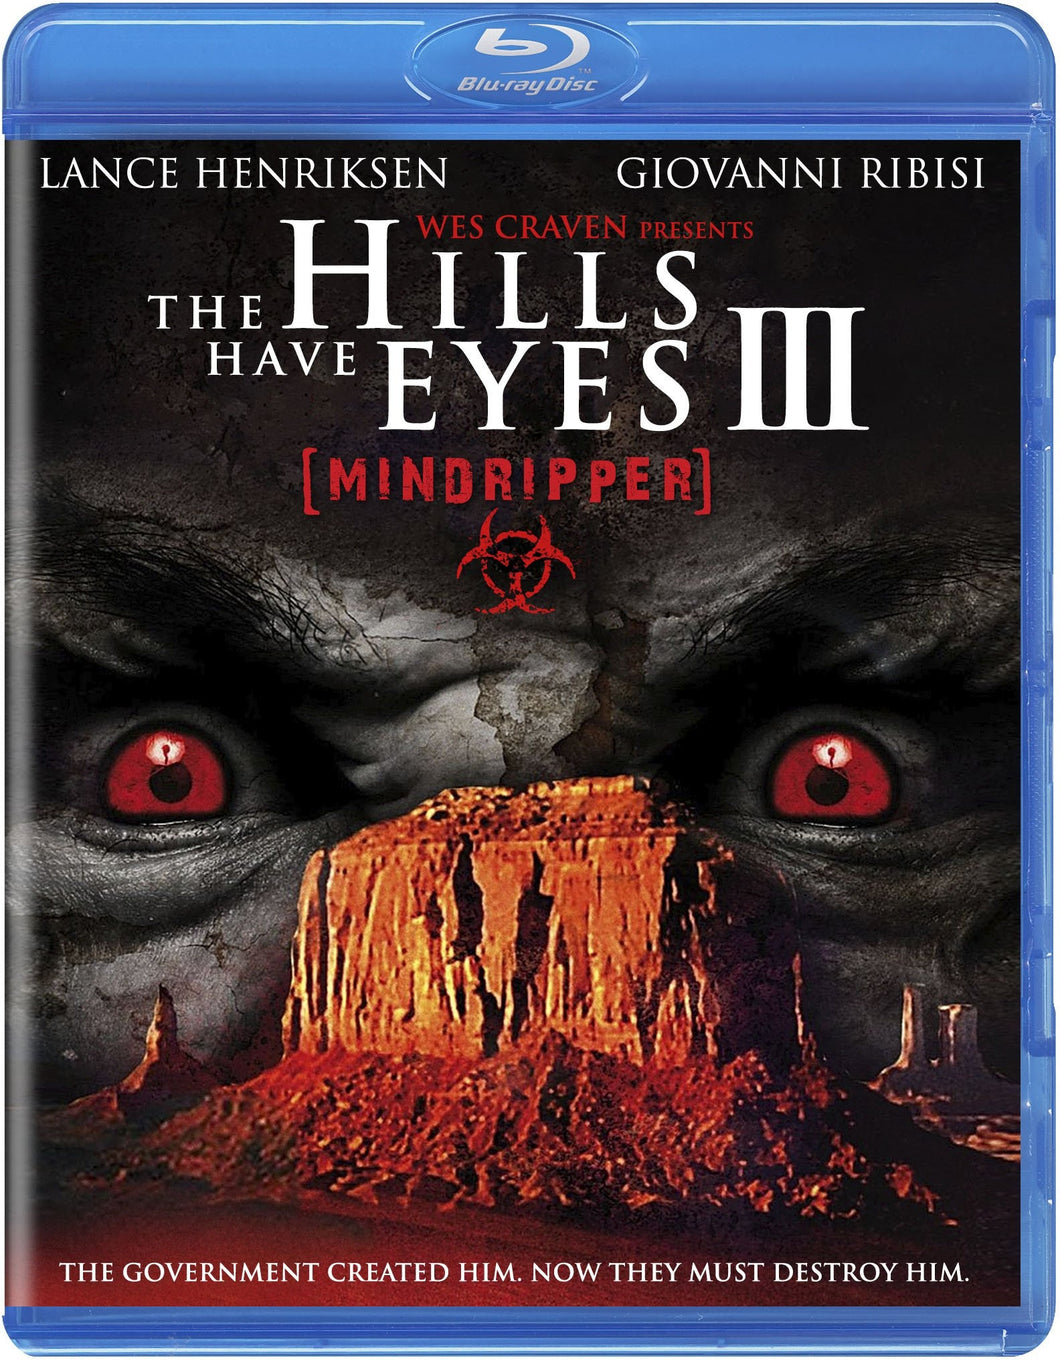 The Hills Have Eyes (Blu-ray): Ronin Flix